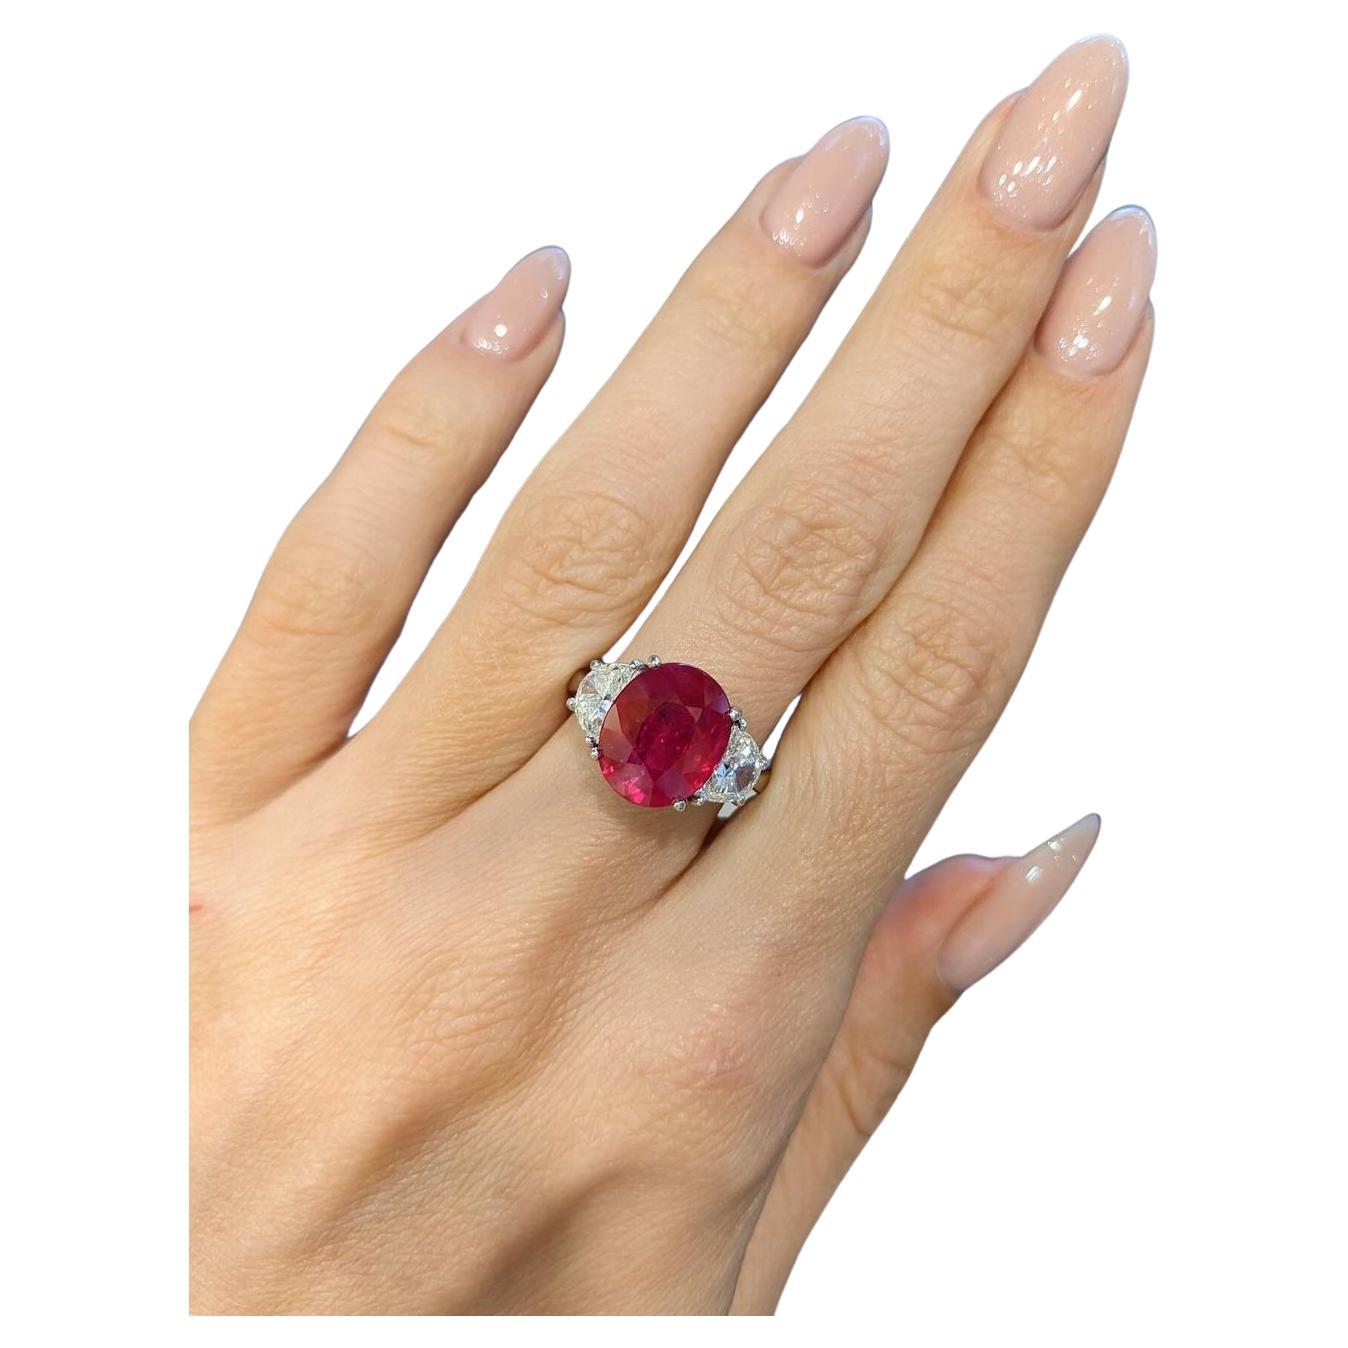 GIA Certified 4.22 Carat Vivid Red Ruby Diamond Cocktail Ring For Sale